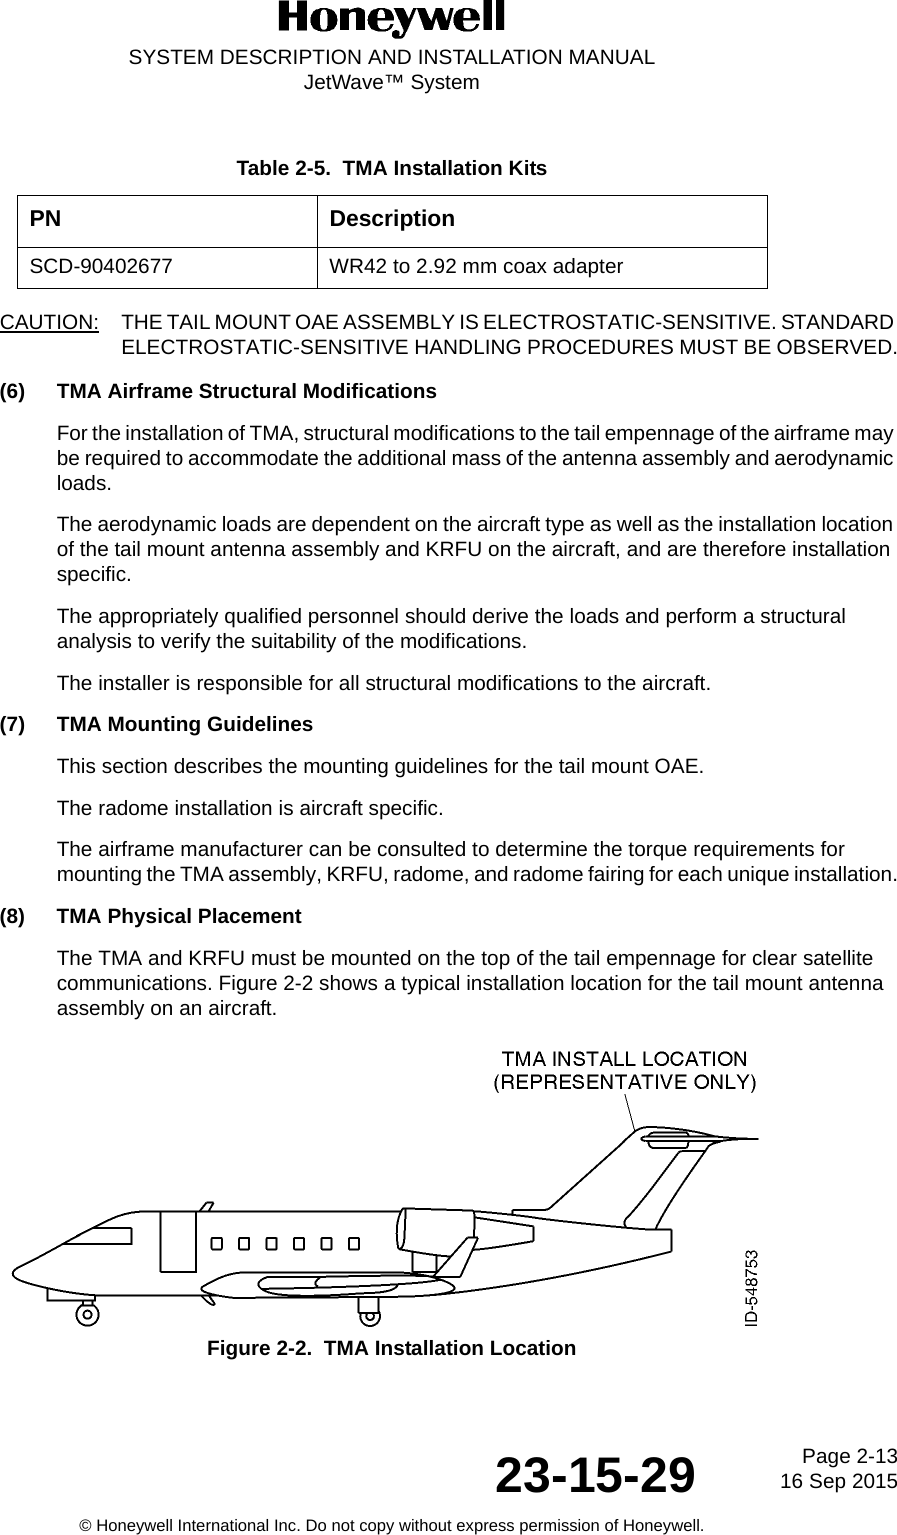 Page 2-13 16 Sep 201523-15-29SYSTEM DESCRIPTION AND INSTALLATION MANUALJetWave™ System© Honeywell International Inc. Do not copy without express permission of Honeywell.CAUTION: THE TAIL MOUNT OAE ASSEMBLY IS ELECTROSTATIC-SENSITIVE. STANDARD ELECTROSTATIC-SENSITIVE HANDLING PROCEDURES MUST BE OBSERVED.(6) TMA Airframe Structural ModificationsFor the installation of TMA, structural modifications to the tail empennage of the airframe may be required to accommodate the additional mass of the antenna assembly and aerodynamic loads. The aerodynamic loads are dependent on the aircraft type as well as the installation location of the tail mount antenna assembly and KRFU on the aircraft, and are therefore installation specific. The appropriately qualified personnel should derive the loads and perform a structural analysis to verify the suitability of the modifications. The installer is responsible for all structural modifications to the aircraft. (7) TMA Mounting GuidelinesThis section describes the mounting guidelines for the tail mount OAE. The radome installation is aircraft specific.The airframe manufacturer can be consulted to determine the torque requirements for mounting the TMA assembly, KRFU, radome, and radome fairing for each unique installation.(8) TMA Physical PlacementThe TMA and KRFU must be mounted on the top of the tail empennage for clear satellite communications. Figure 2-2 shows a typical installation location for the tail mount antenna assembly on an aircraft.Figure 2-2.  TMA Installation LocationTable 2-5.  TMA Installation KitsPN DescriptionSCD-90402677 WR42 to 2.92 mm coax adapter